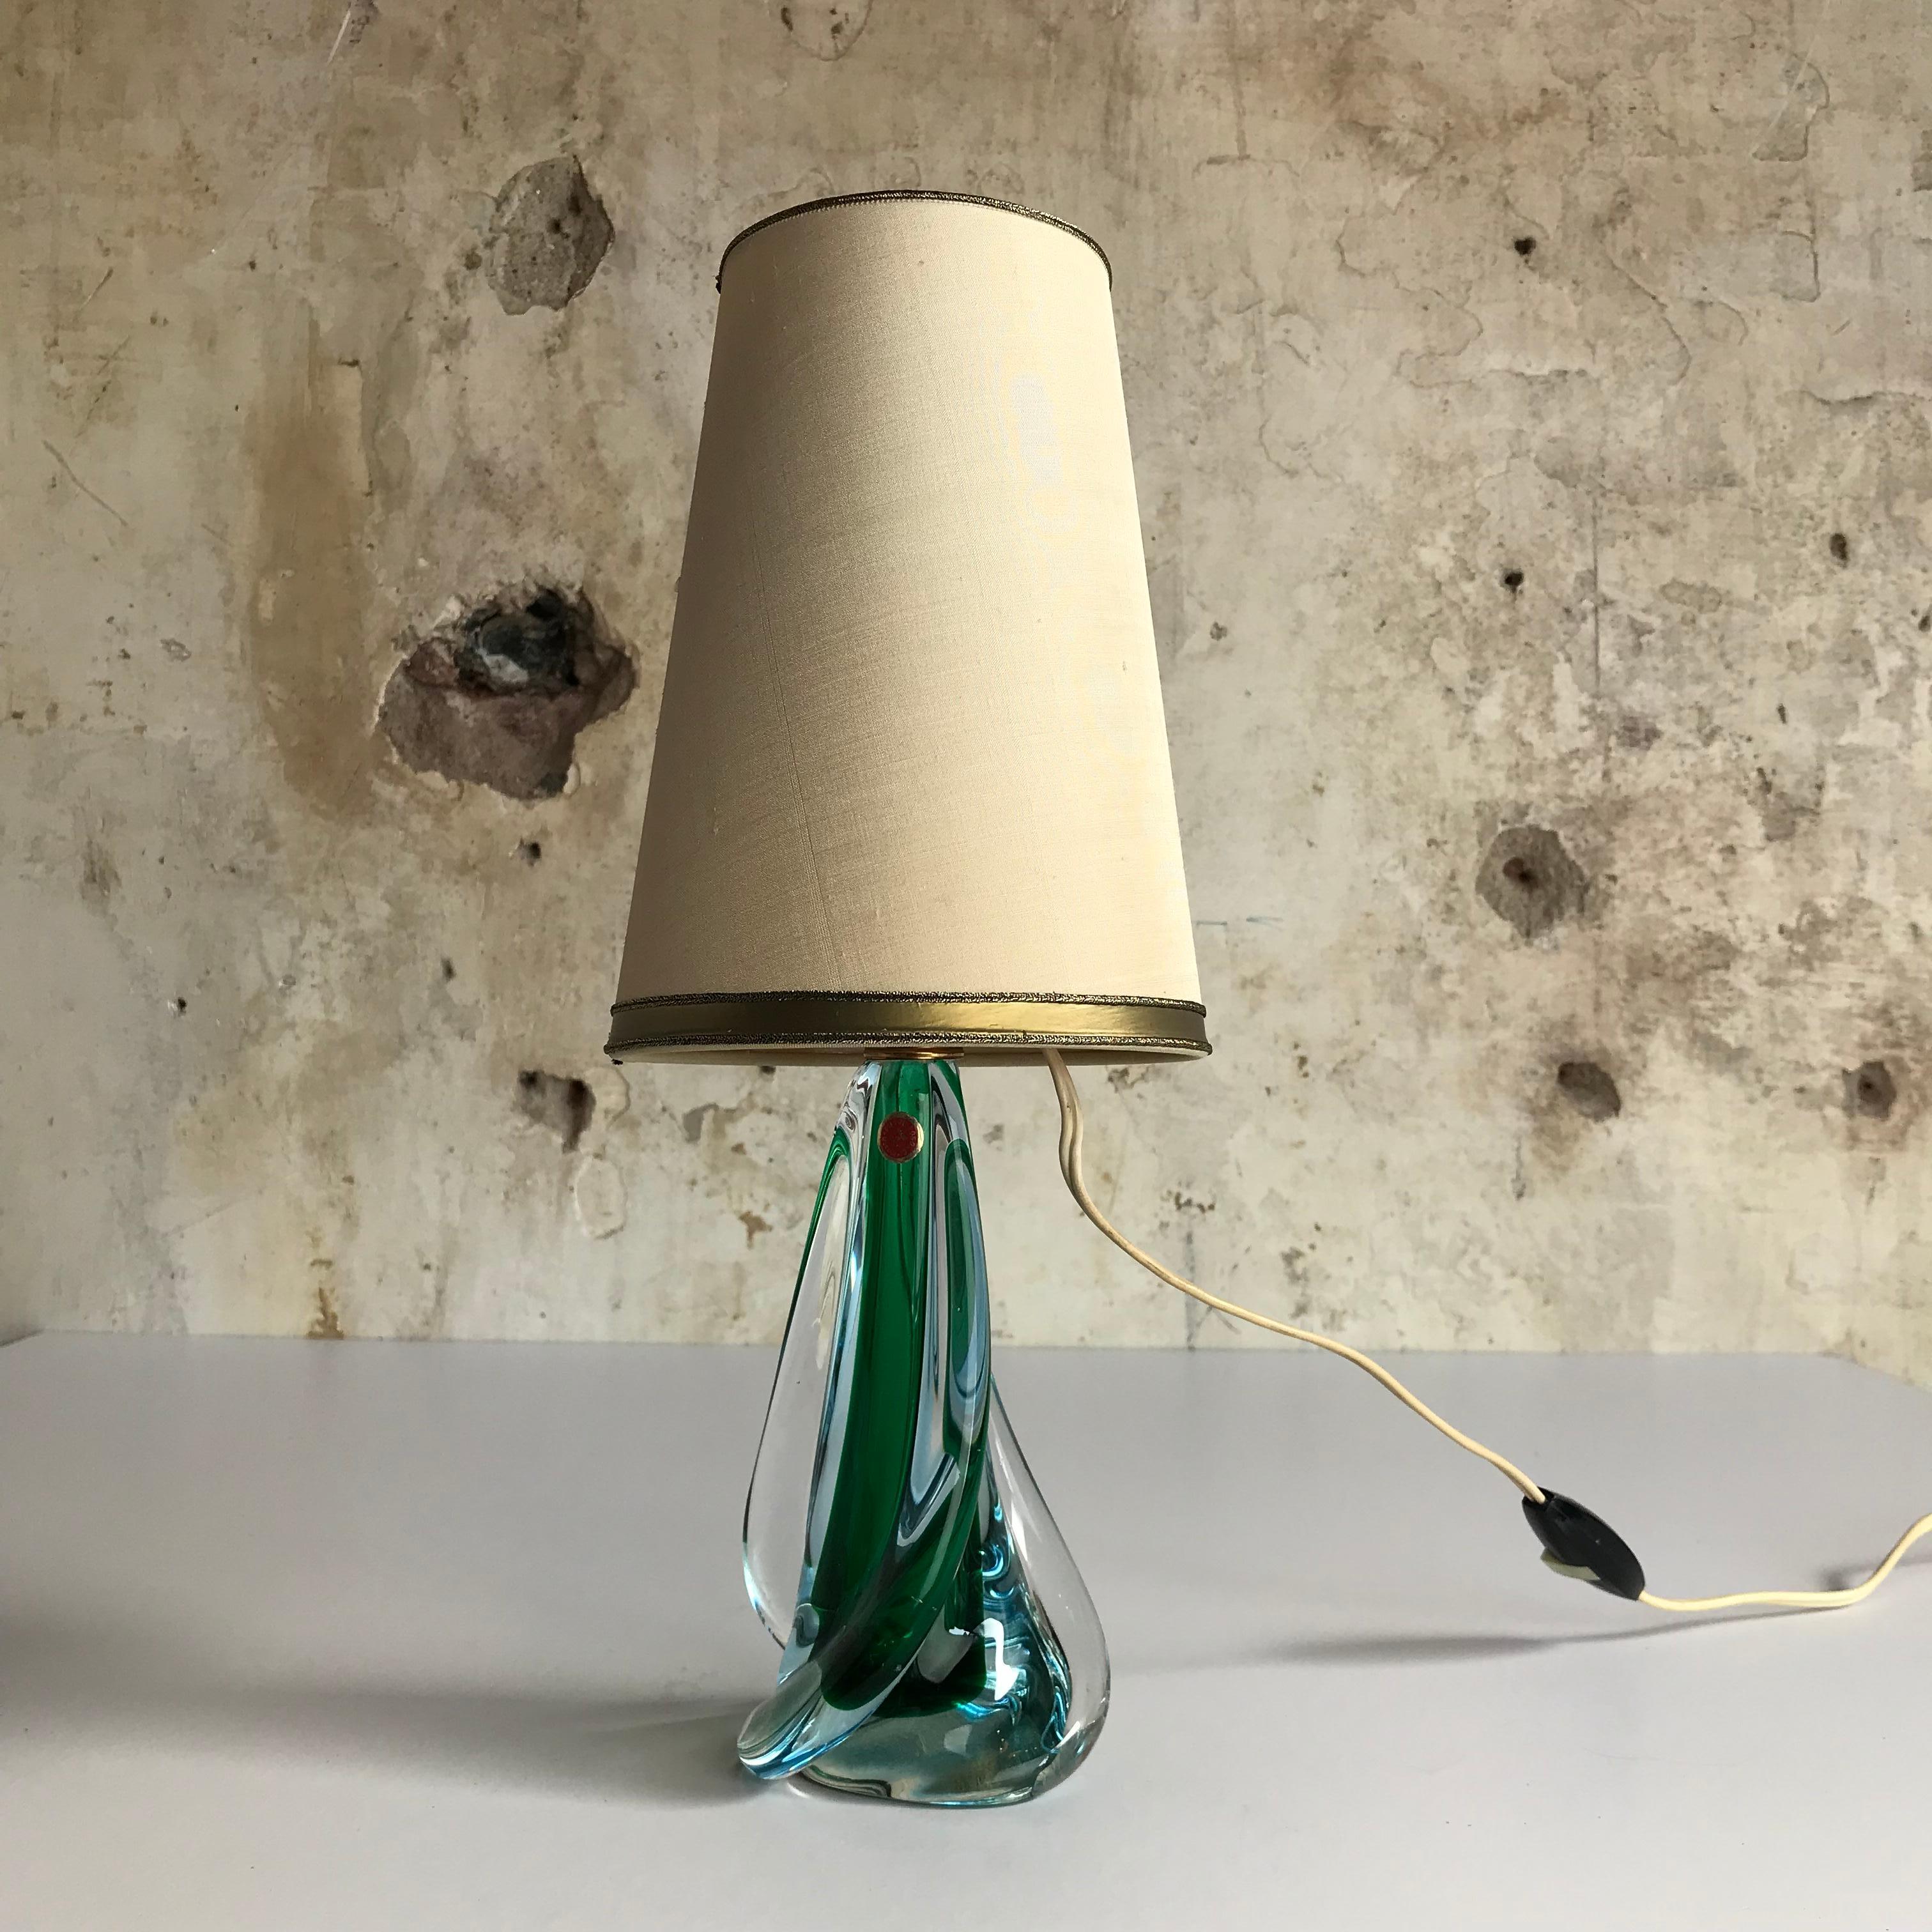 Mid-20th Century 1950s Italian Murano Art Glass Lamp by Pietro Toso, Midcentury, Vintage For Sale